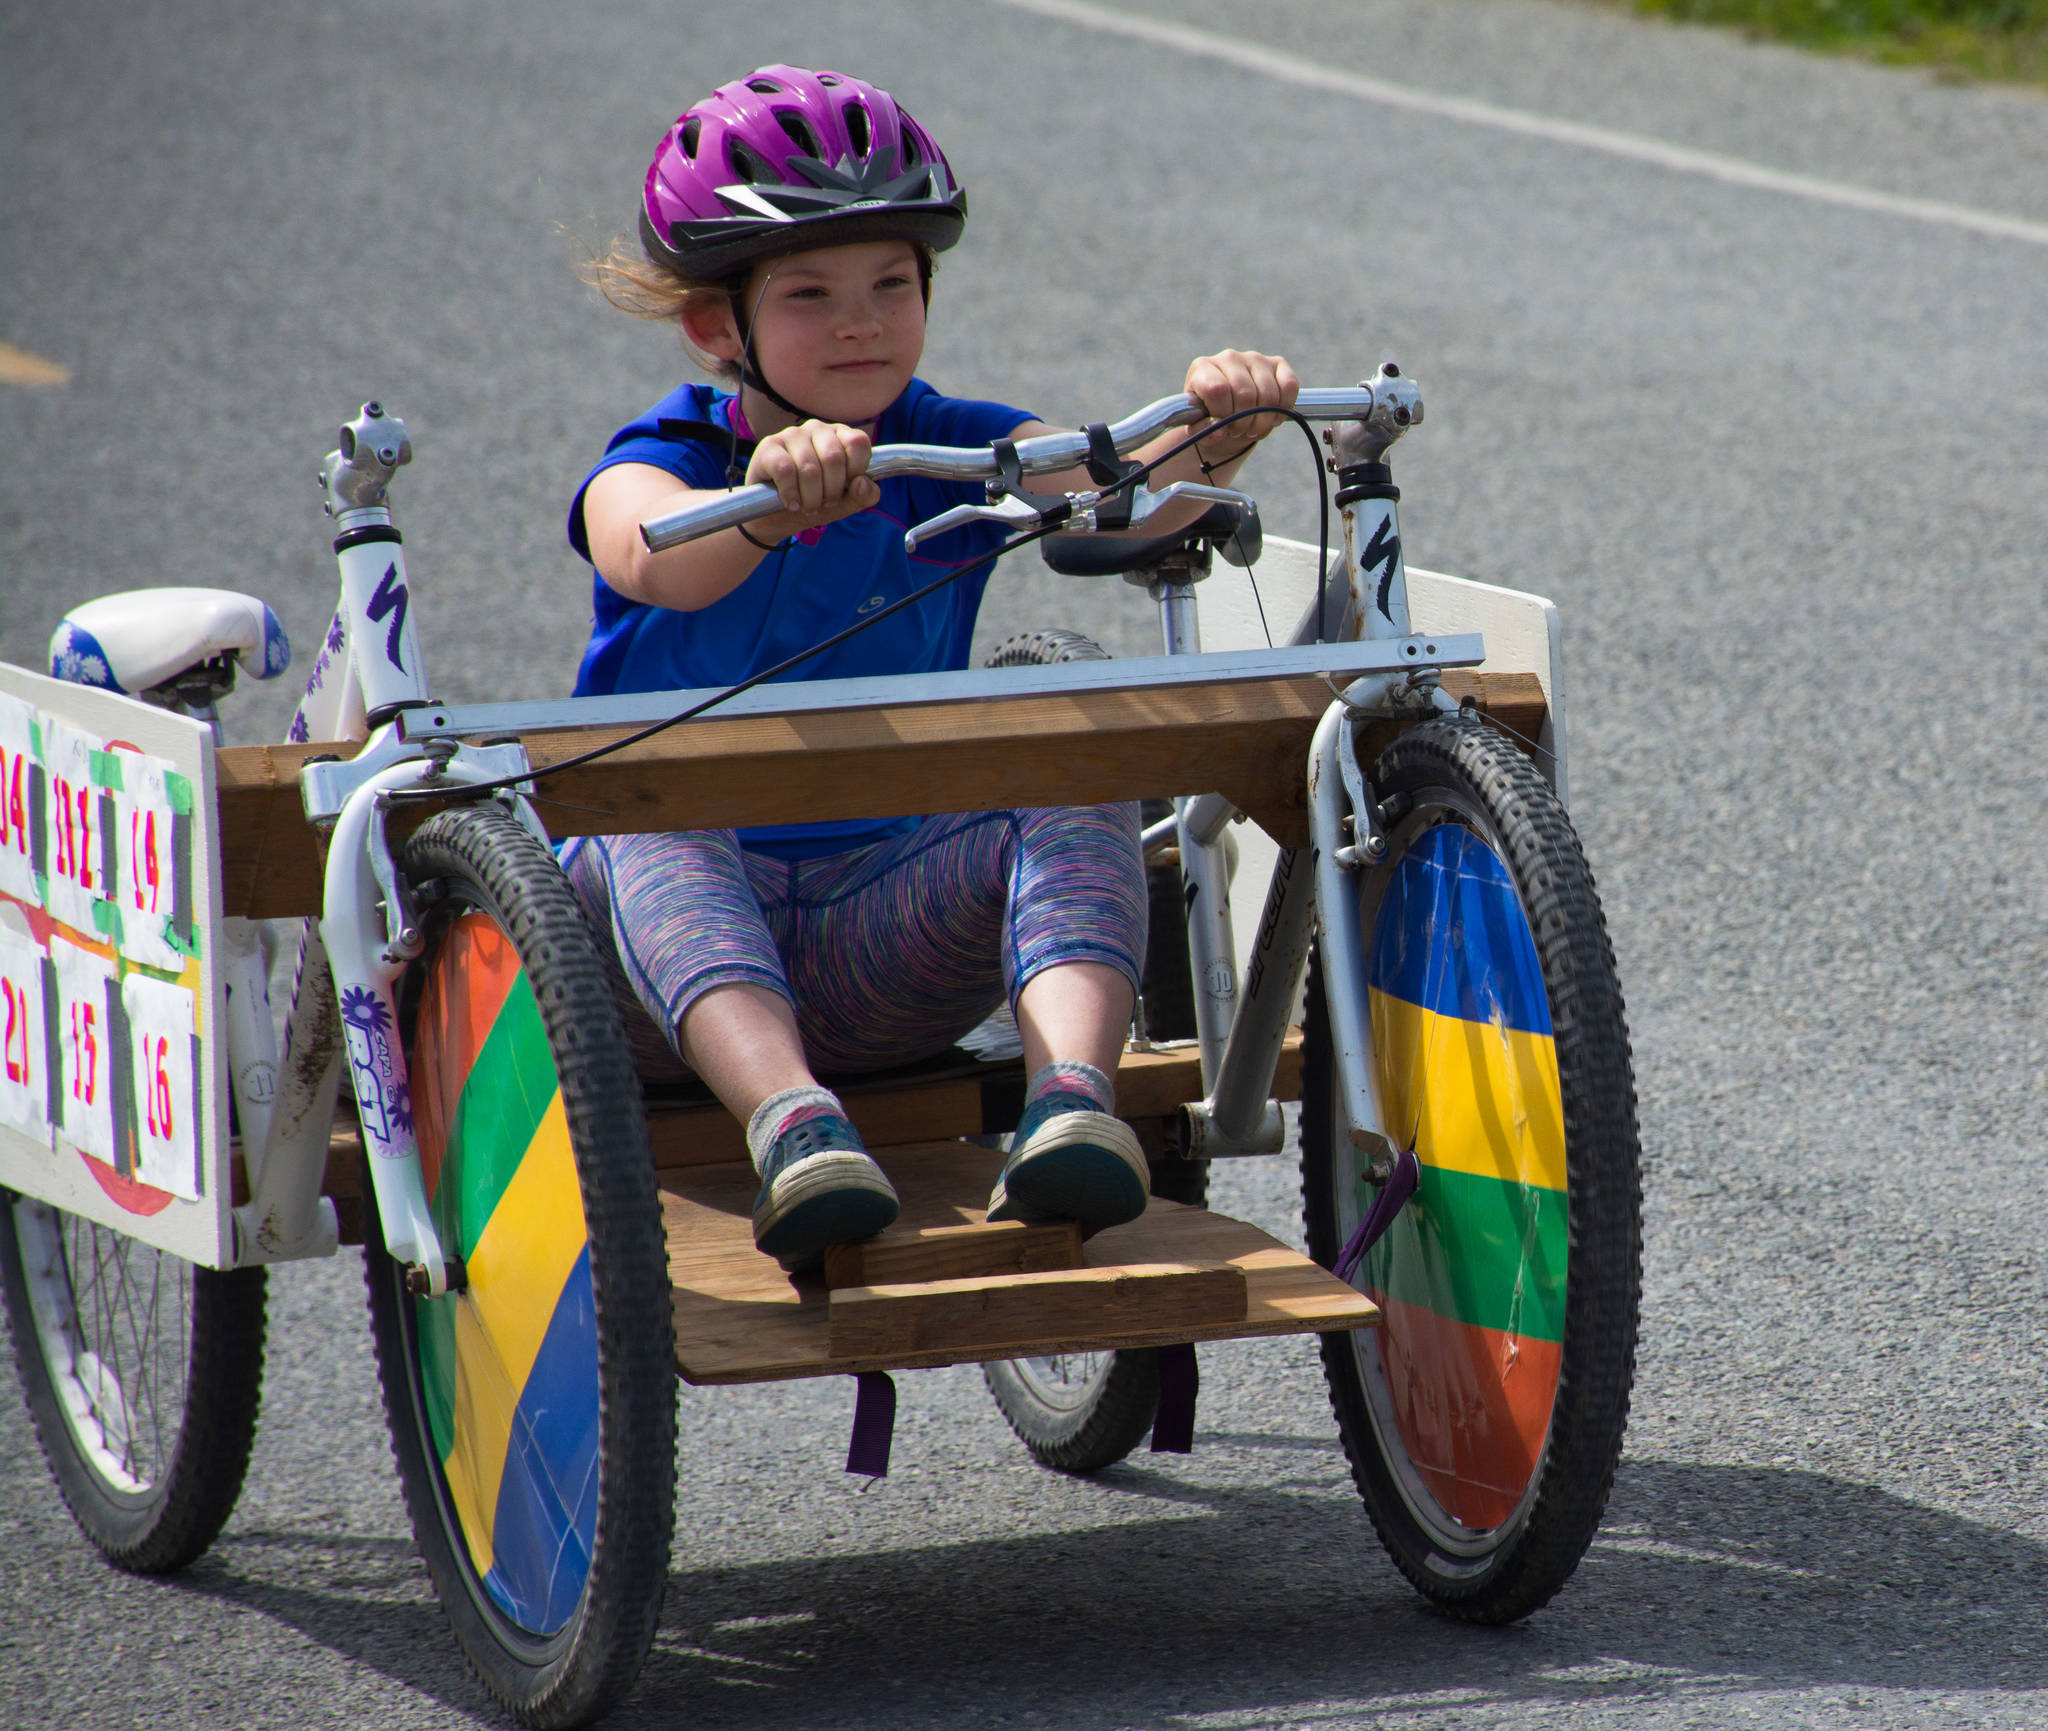 Join Island Rec’s ‘Hill of Thrills’ soapbox race